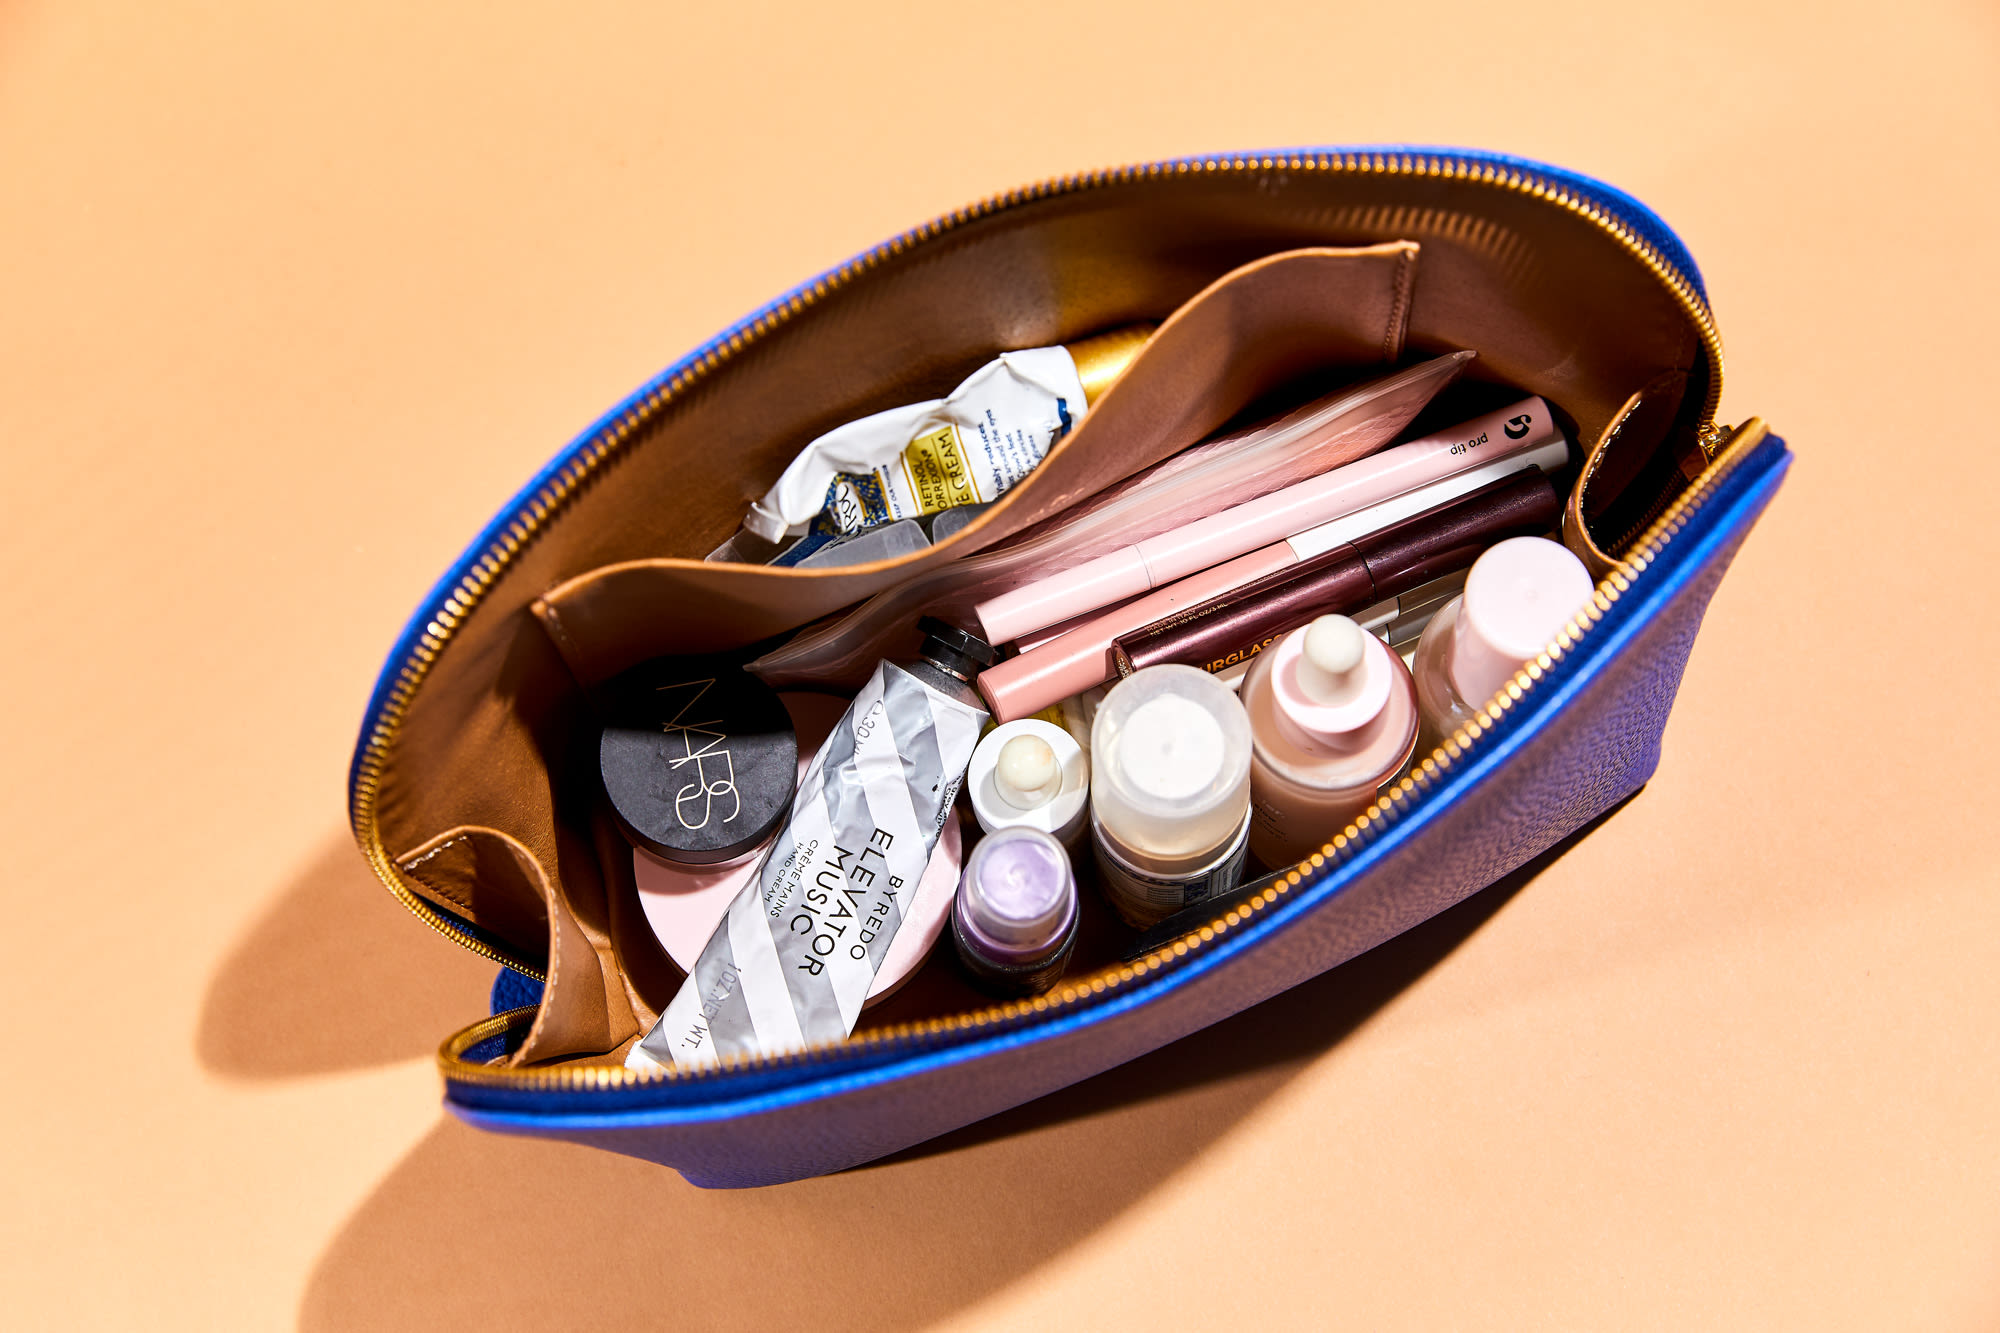 18 Things to Have in Your Purse For Emergencies - The Survival Mom